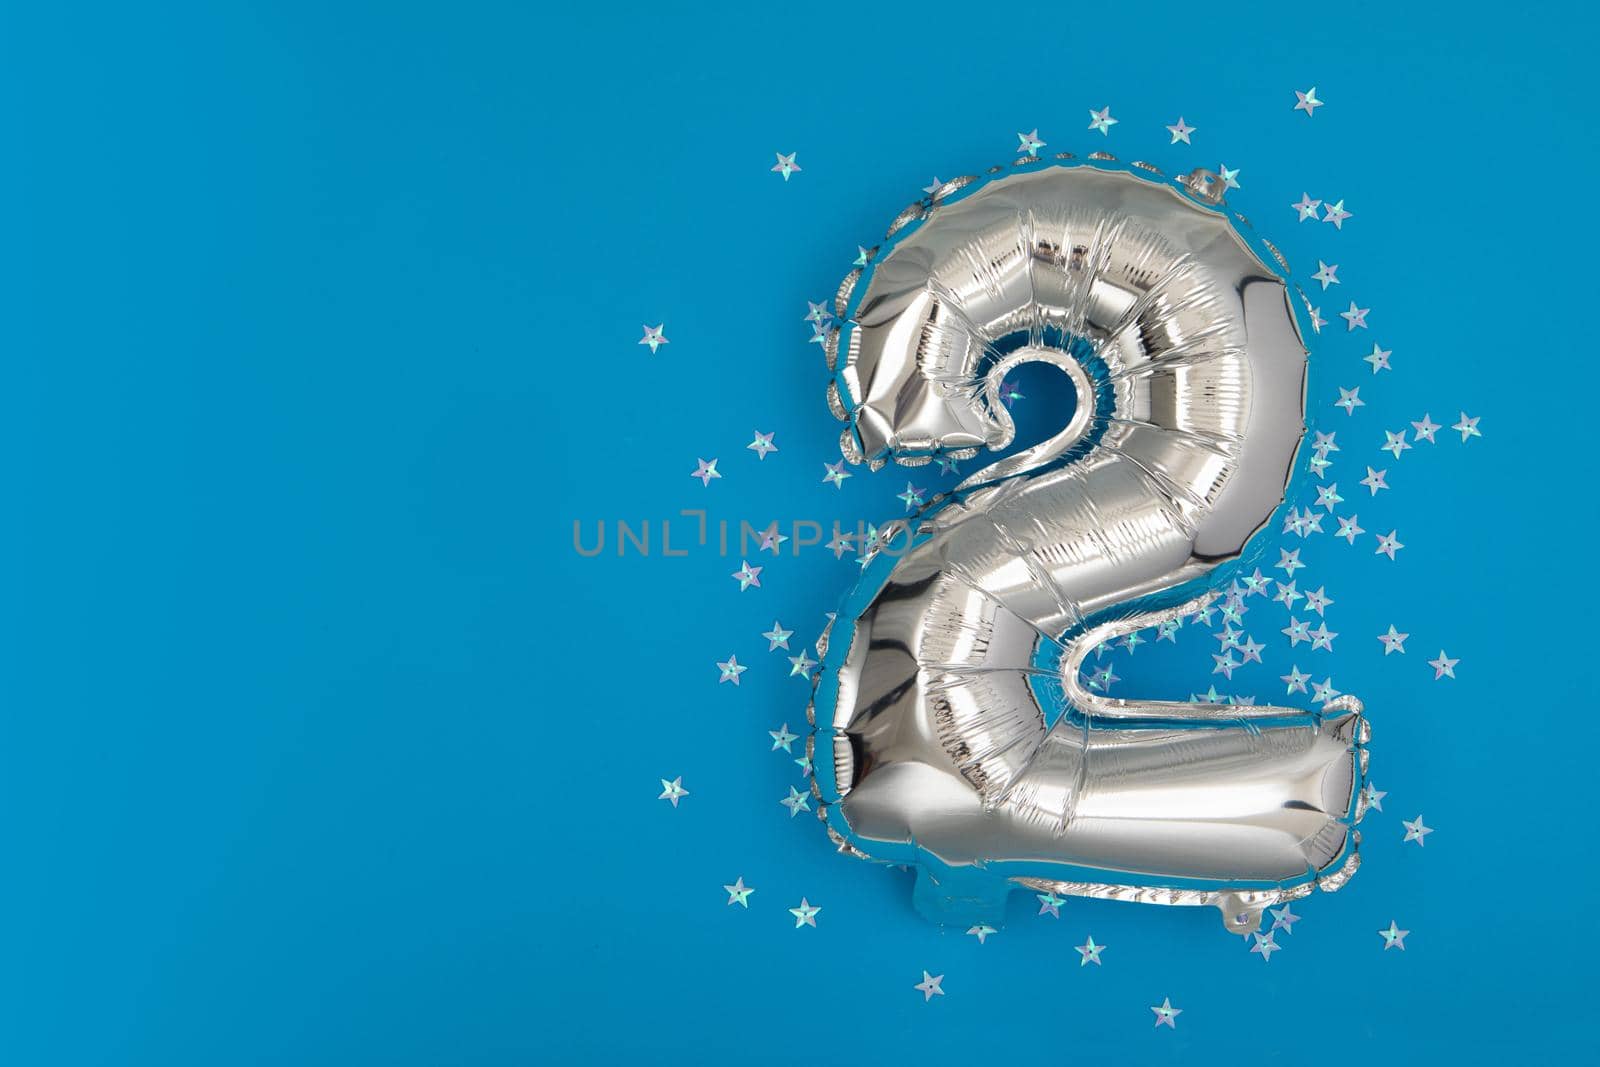 Silver balloon 2 on a blue background with confetti stars by Demkat